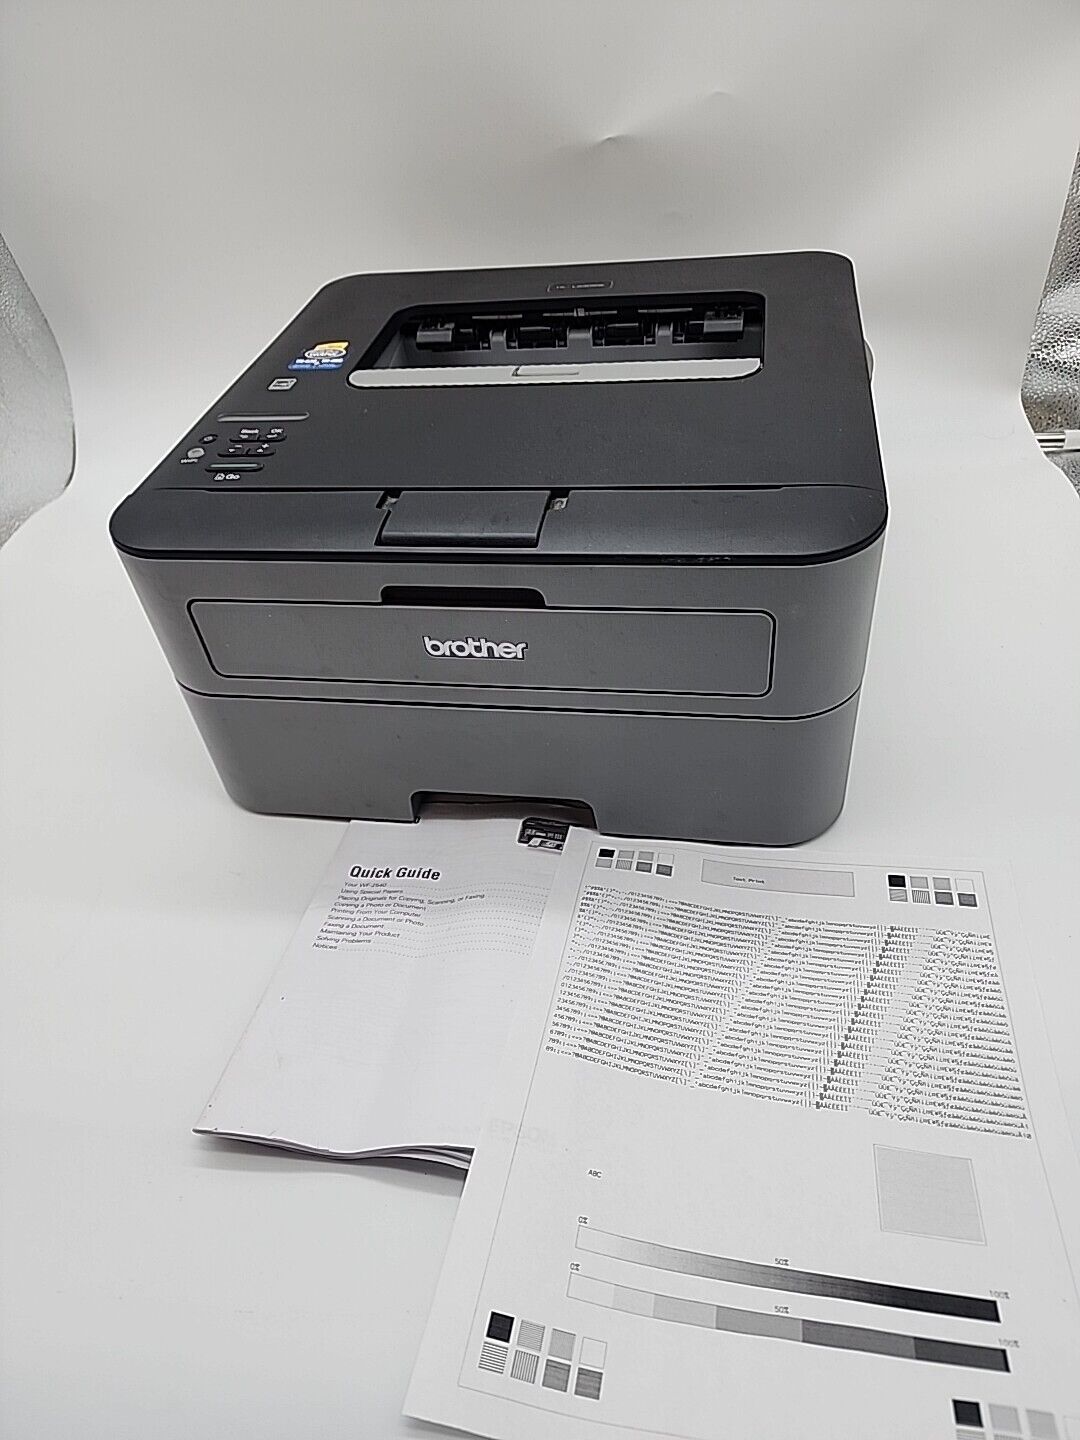 Brother HL-L2305W Compact Mono Laser Printer Wireless Page Count 1408, 70% Toner